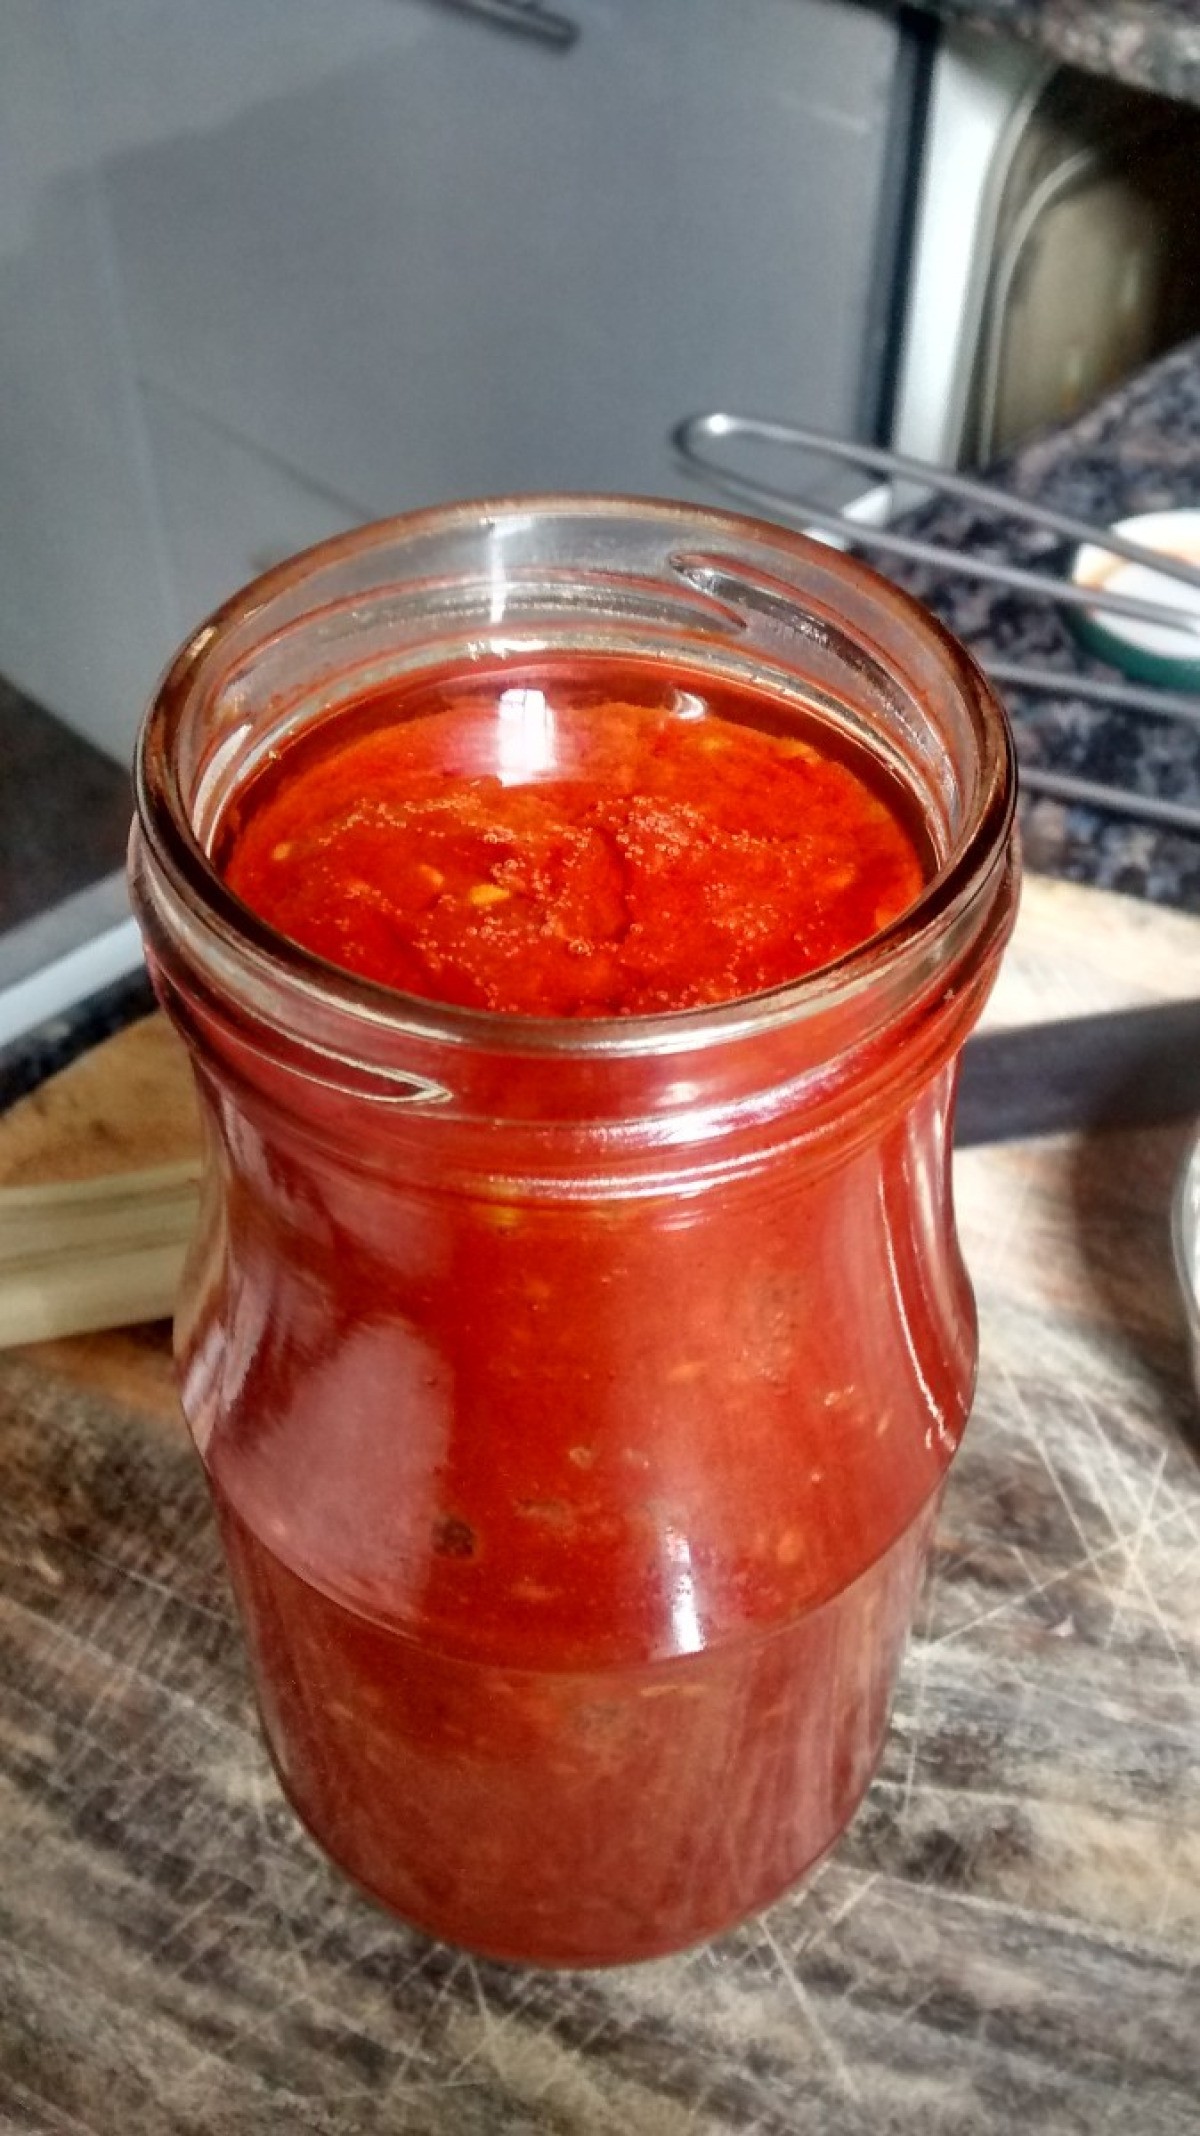 replacement for tomato paste